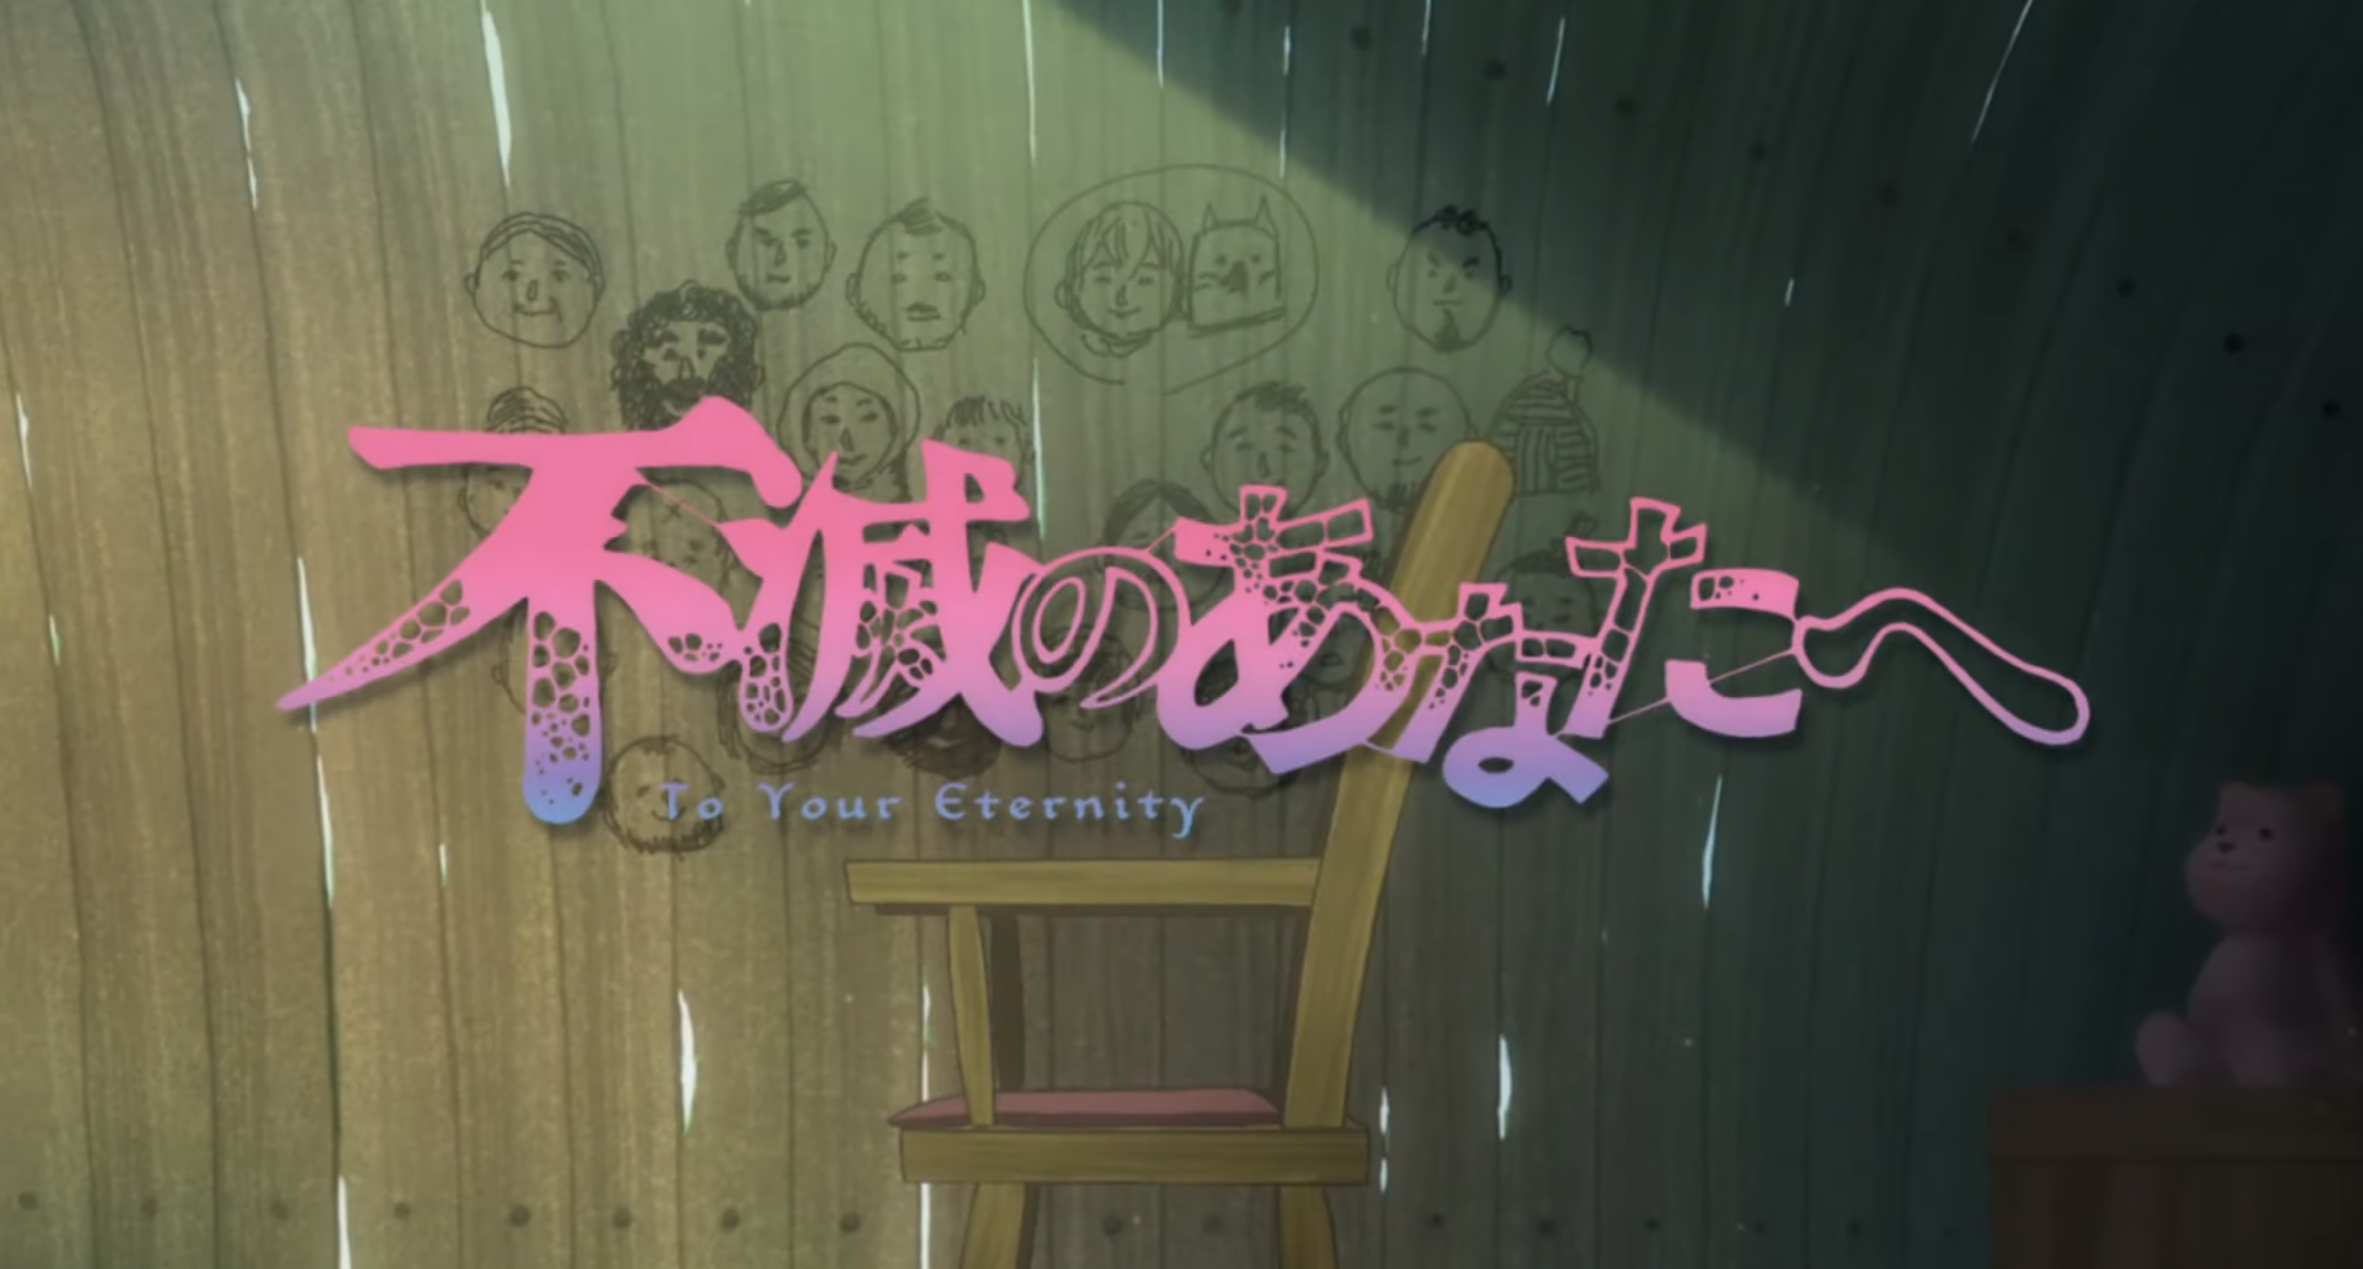 X \ MyAnimeList على X: Fumetsu no Anata e (To Your Eternity) unveils  second promo, featuring the theme song PINK BLOOD by Hikaru Utada;  Brain's Base produces supernatural drama anime for an